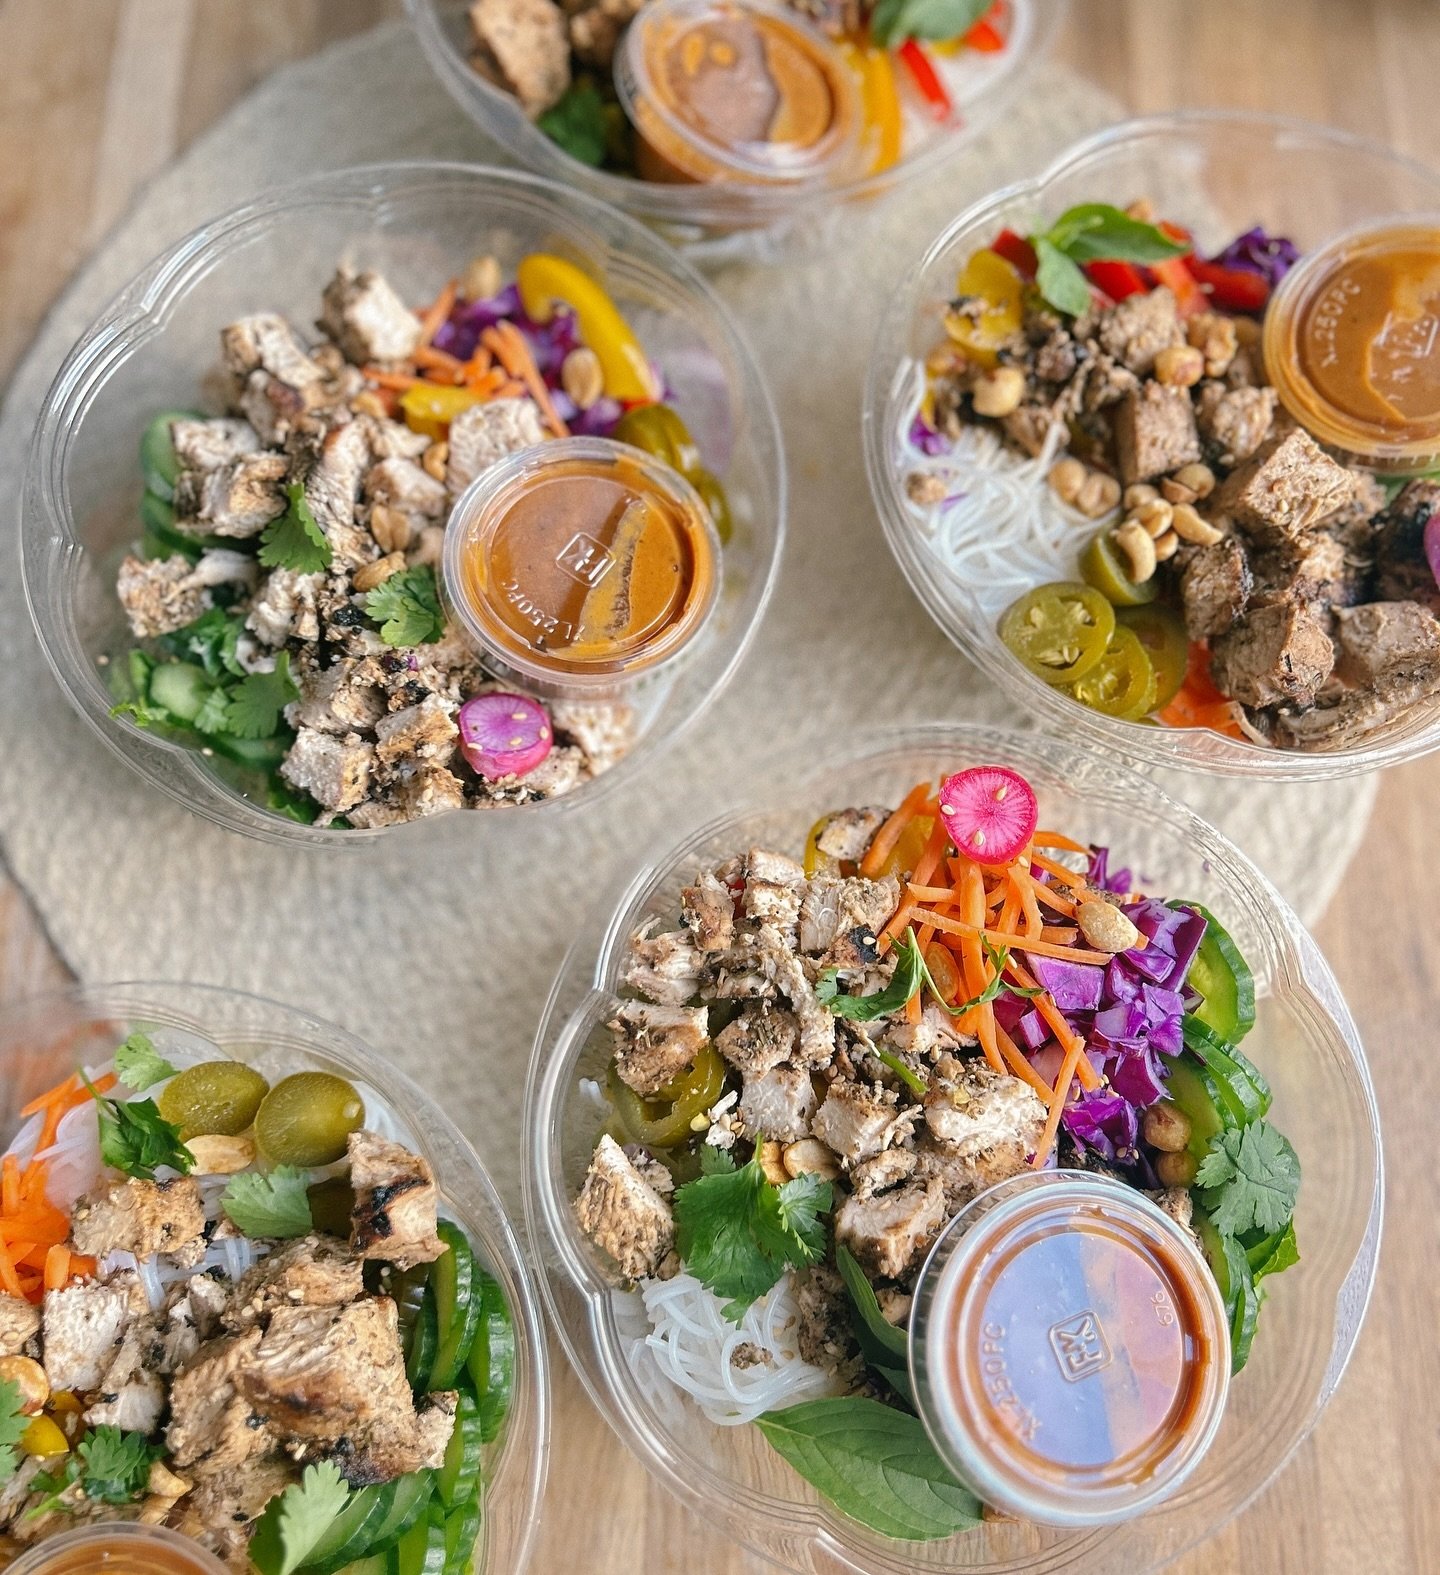 How good were these Spring Roll Bowls last week?!

532 kcal, 31.1g C, 21.8g F &amp; 52.1g Protein